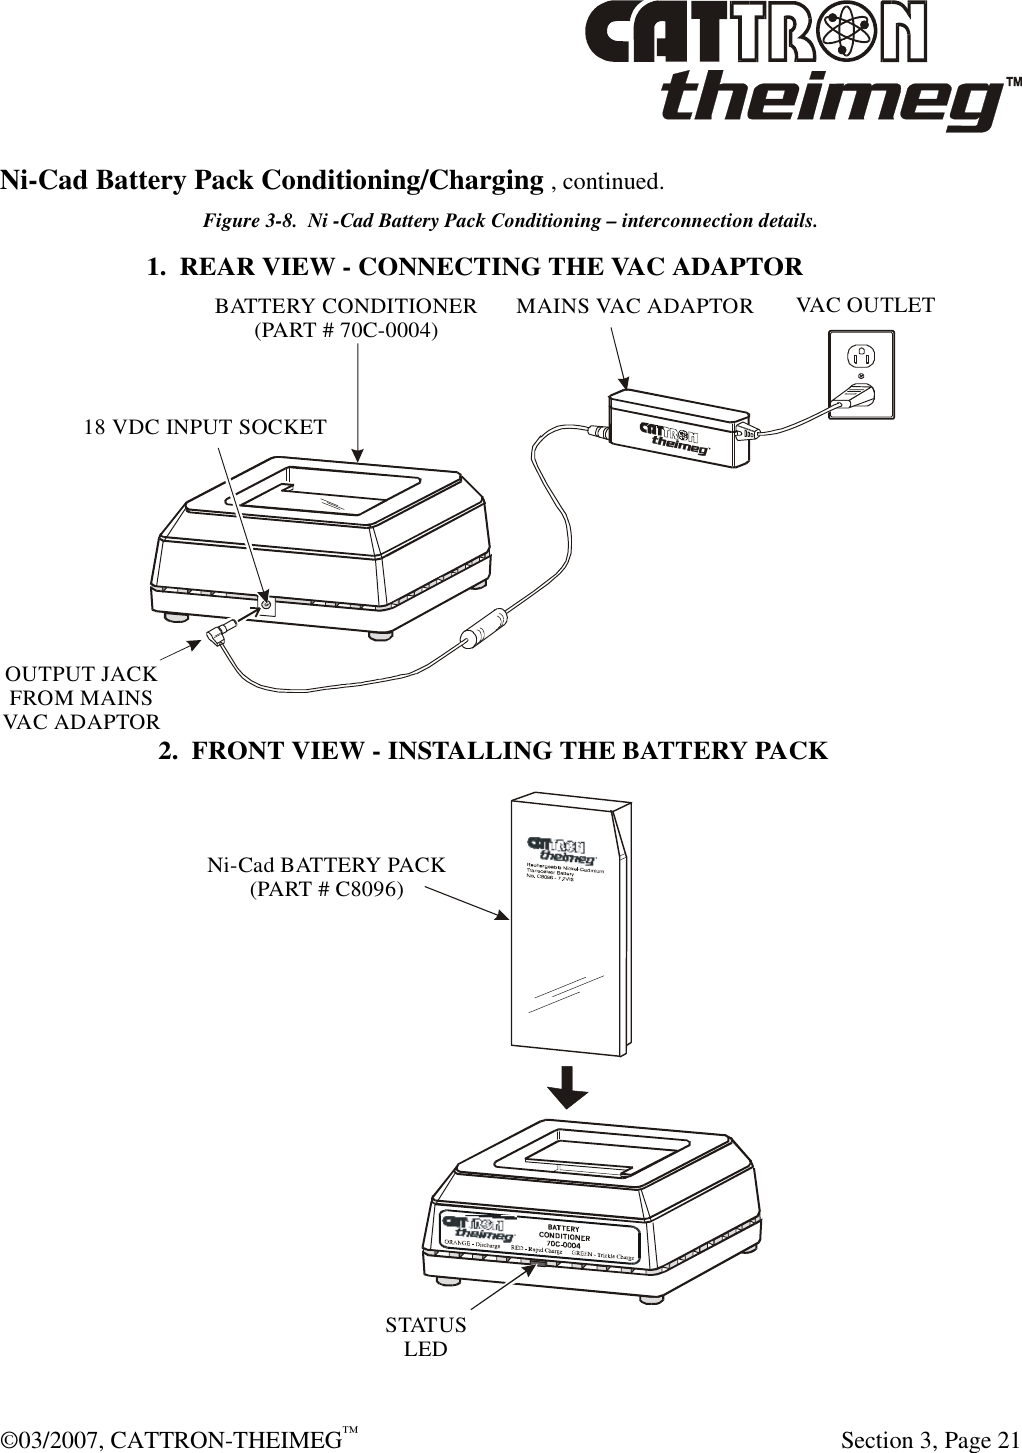  ©03/2007, CATTRON-THEIMEG™     Section 3, Page 21 Ni-Cad Battery Pack Conditioning/Charging , continued. Figure 3-8.  Ni -Cad Battery Pack Conditioning – interconnection details. 1.  REAR VIEW - CONNECTING THE VAC ADAPTOR2.  FRONT VIEW - INSTALLING THE BATTERY PACKOUTPUT JACKFROM MAINSVAC ADAPTORMAINS VAC ADAPTORVAC OUTLET18 VDC INPUT SOCKETBATTERY CONDITIONER(PART # 70C-0004)STATUSLEDNi-Cad BATTERY PACK(PART # C8096)  